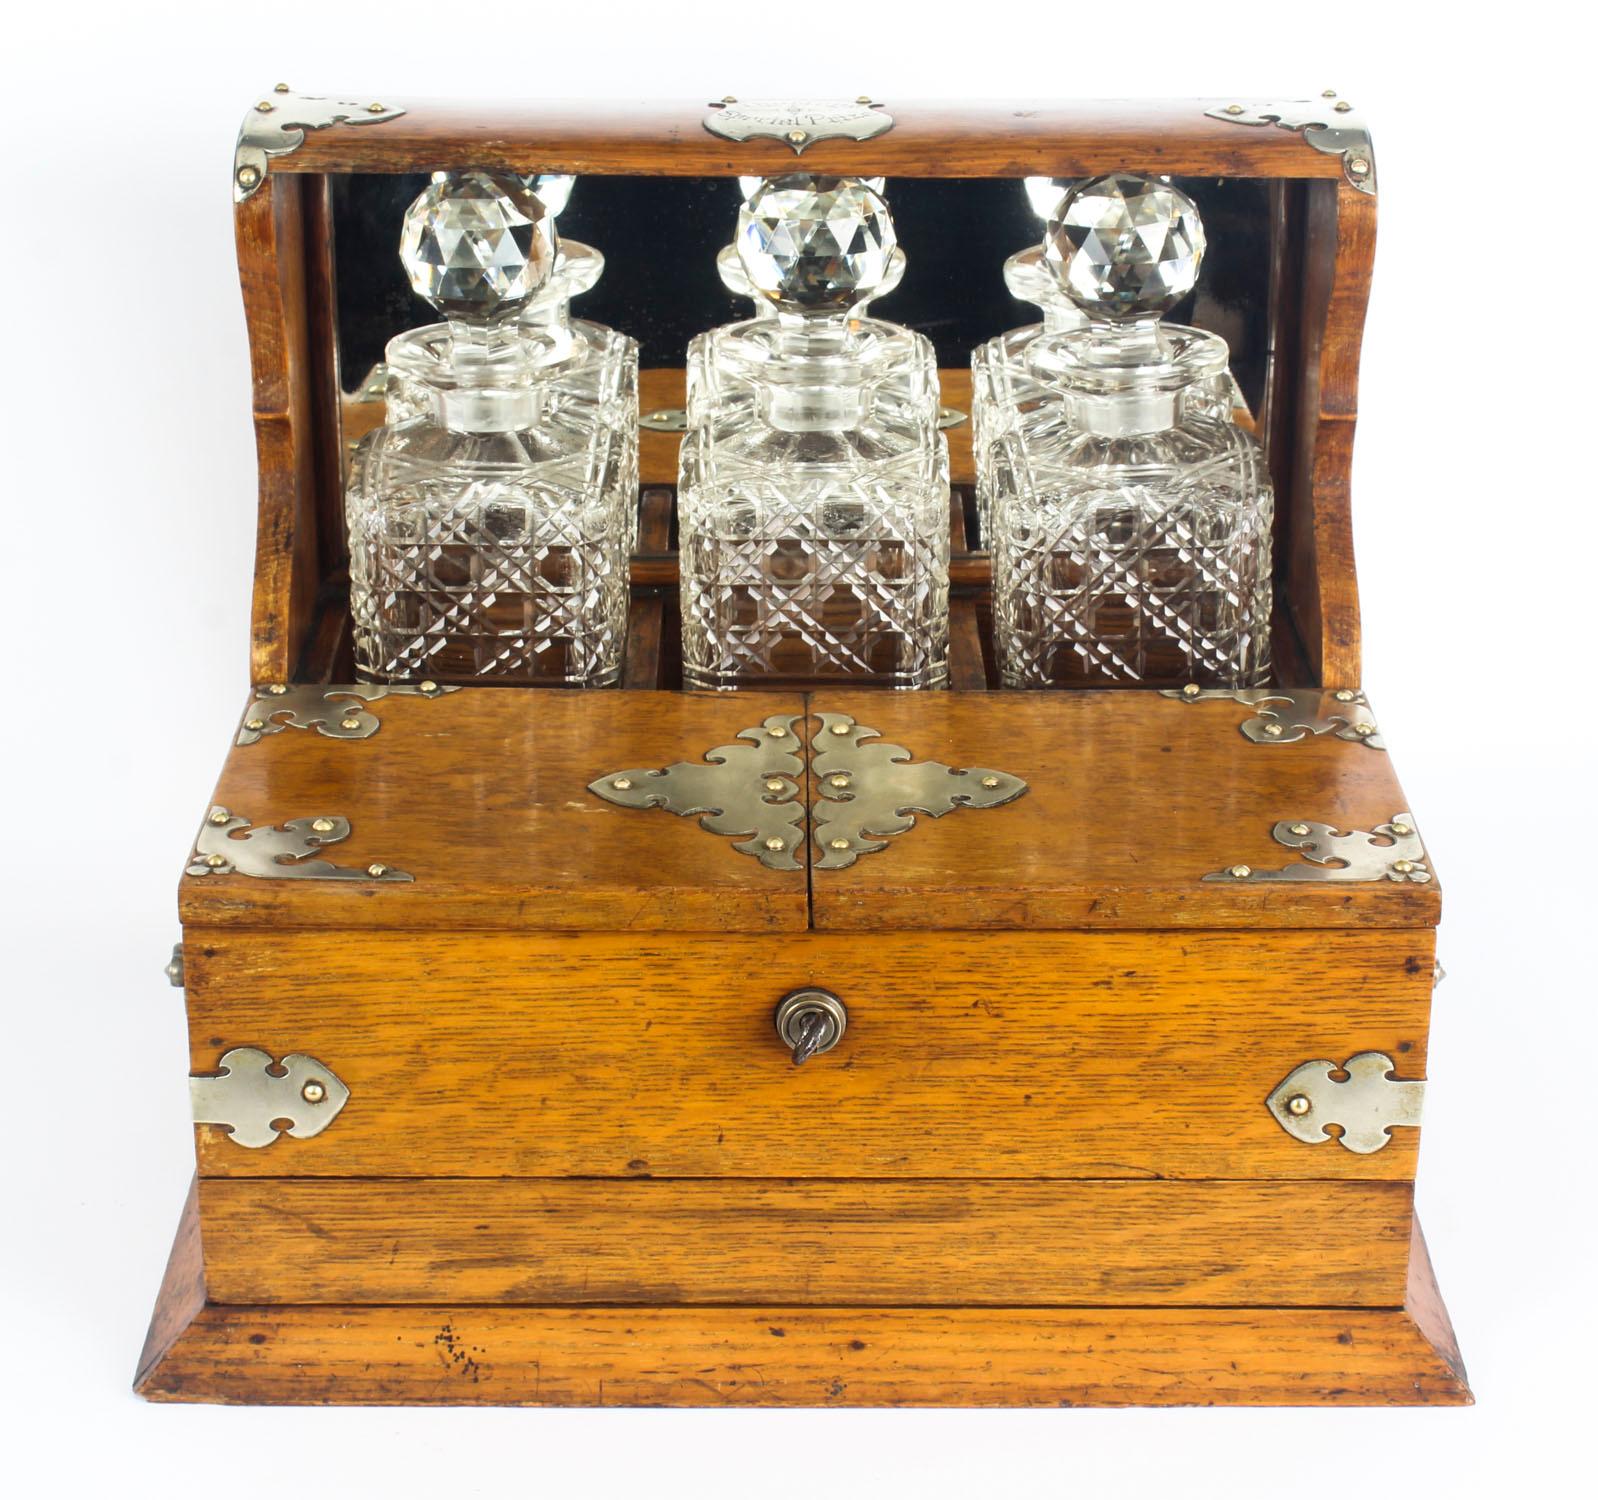 This is a superb antique Victorian oak cased three decanter tantalus with decorative silver plated cut brass mounts, shield marked 